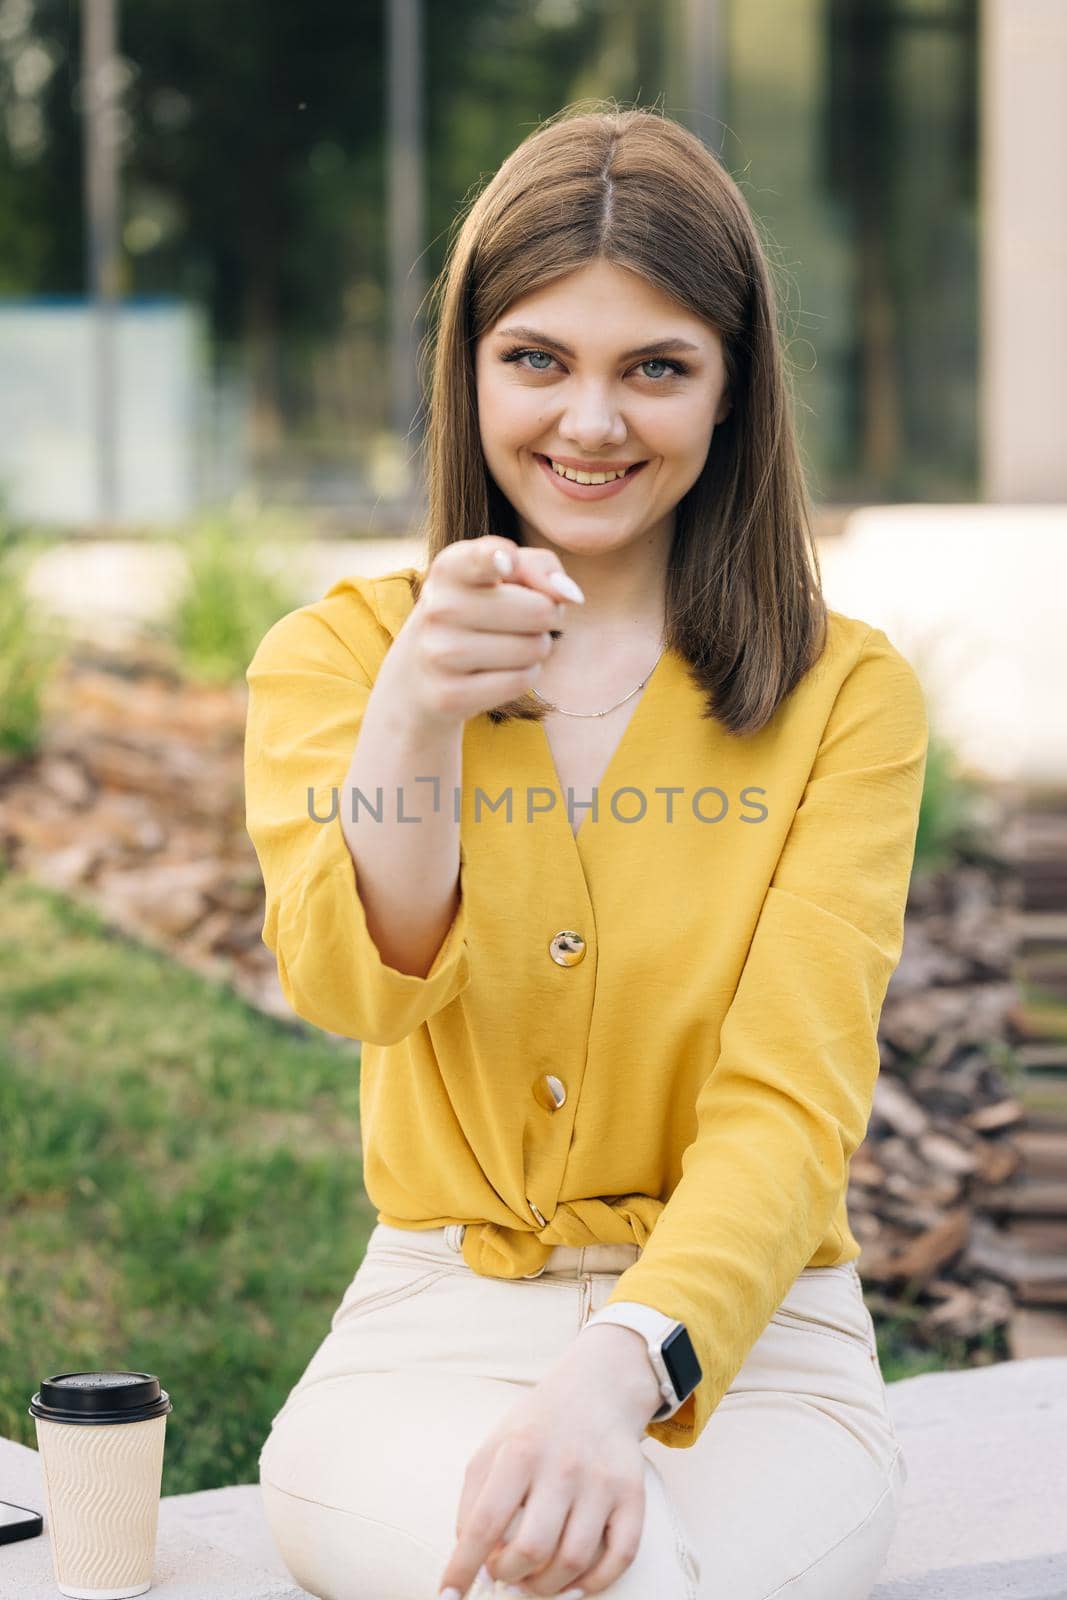 Beautiful european ukraininan girl pointing index finger at camera inviting with hand gesture. Young ethnic happy woman calling to showing something and speaking body language. Hey you, come here.